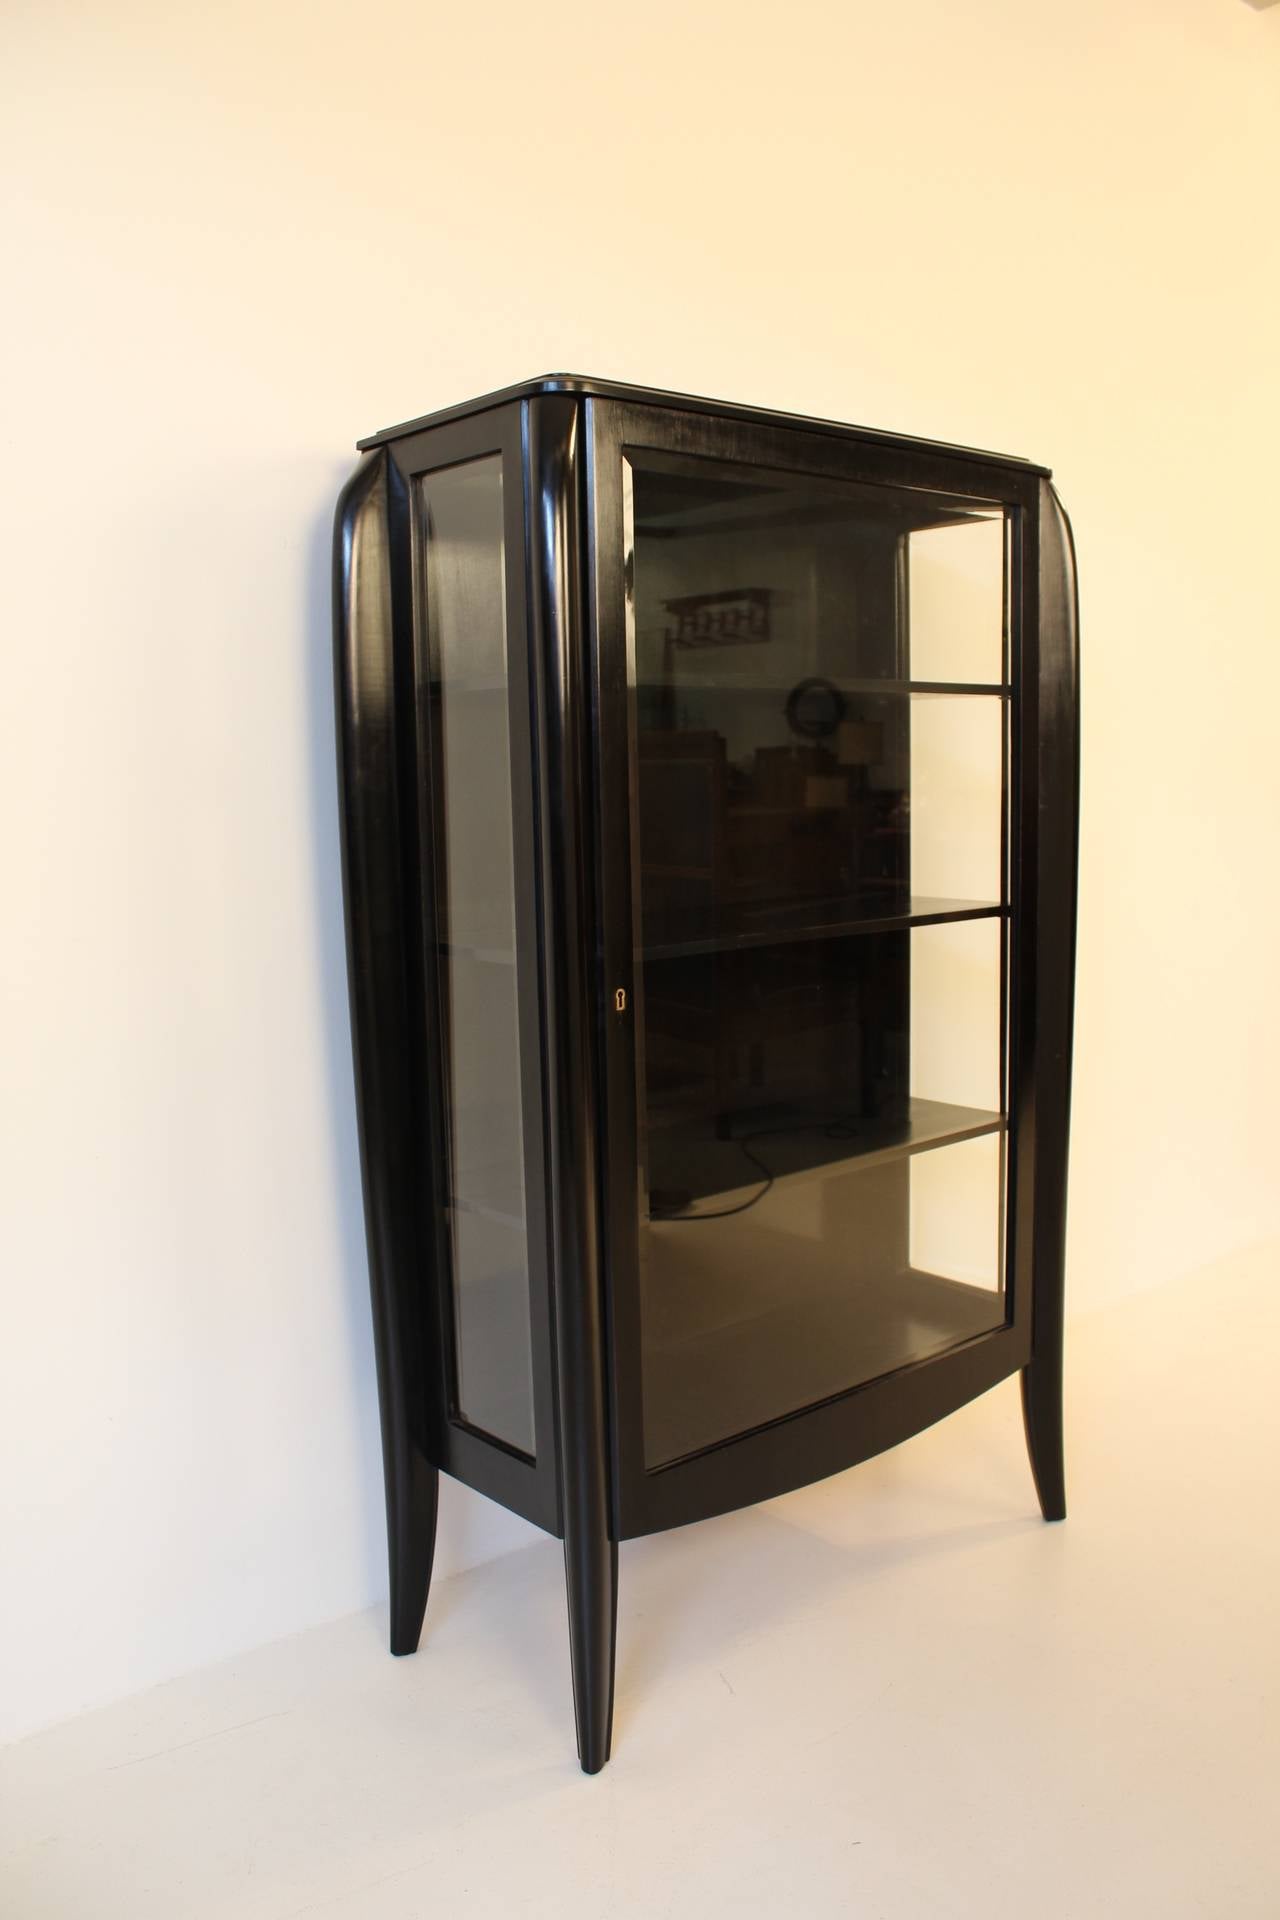 Stunning ebonized French Art Deco display cabinet with beveled glass in door and on both sides.Three original adjustable shelves.
In very good refinished condition.